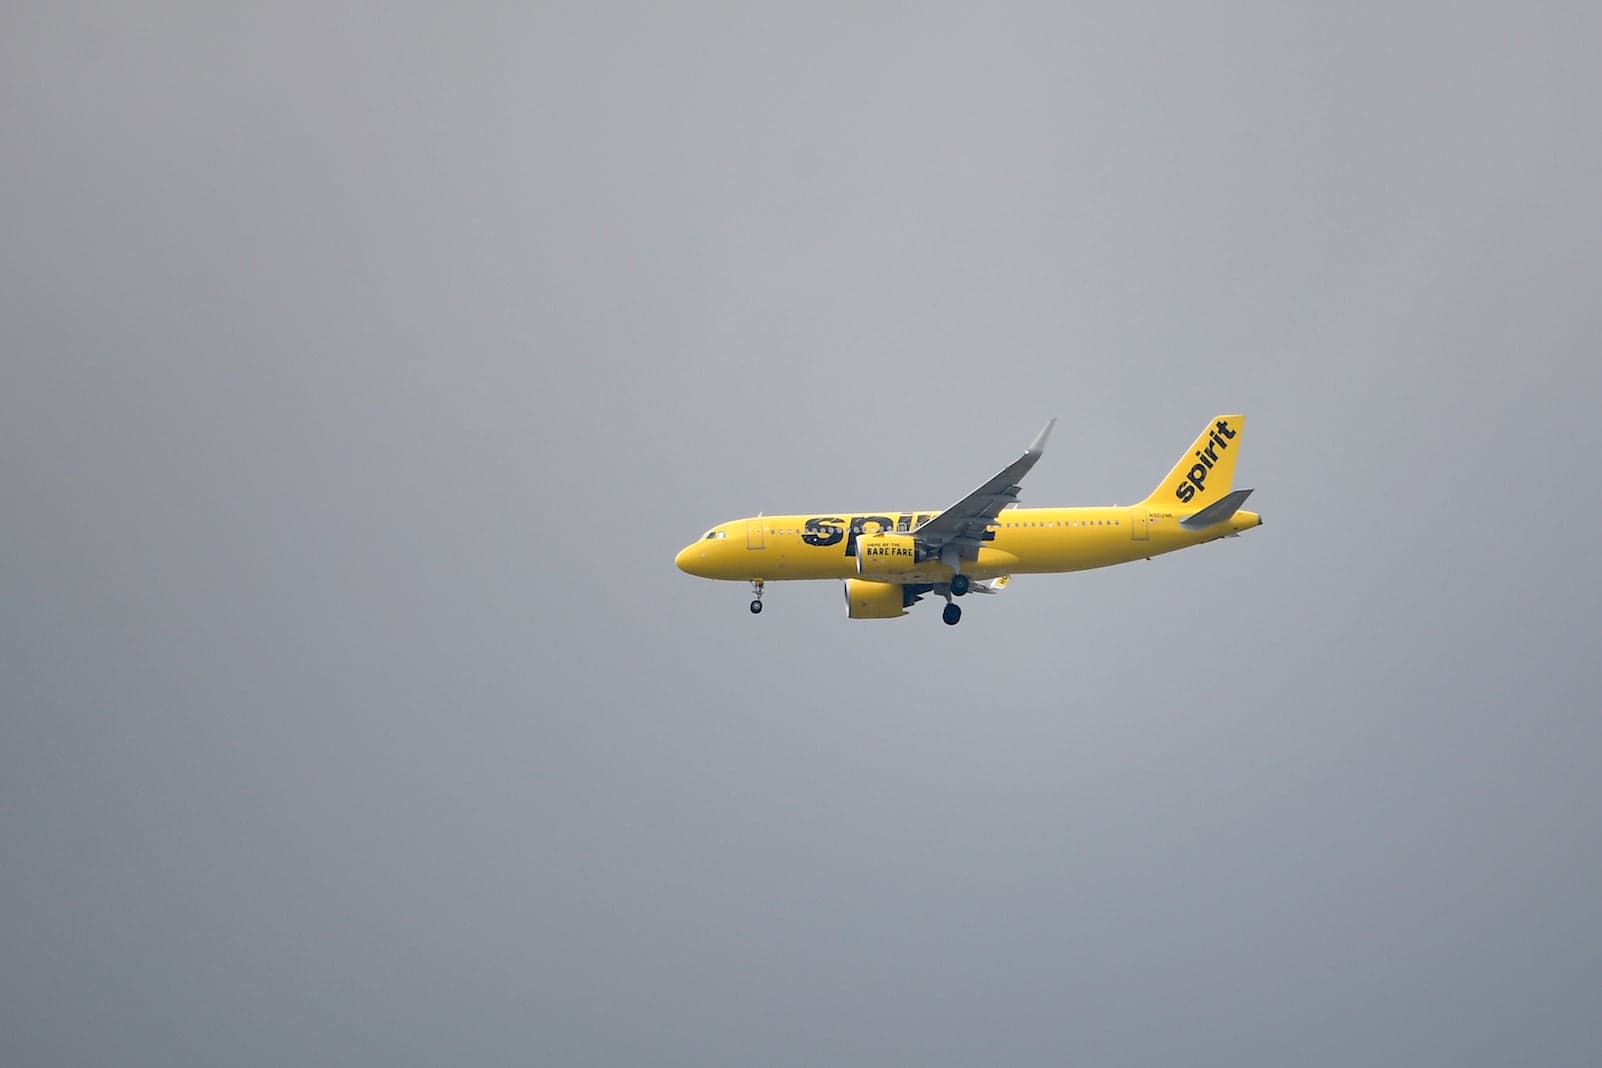 This Spirit Airlines Flight Late More Than 50 Percent of the Time